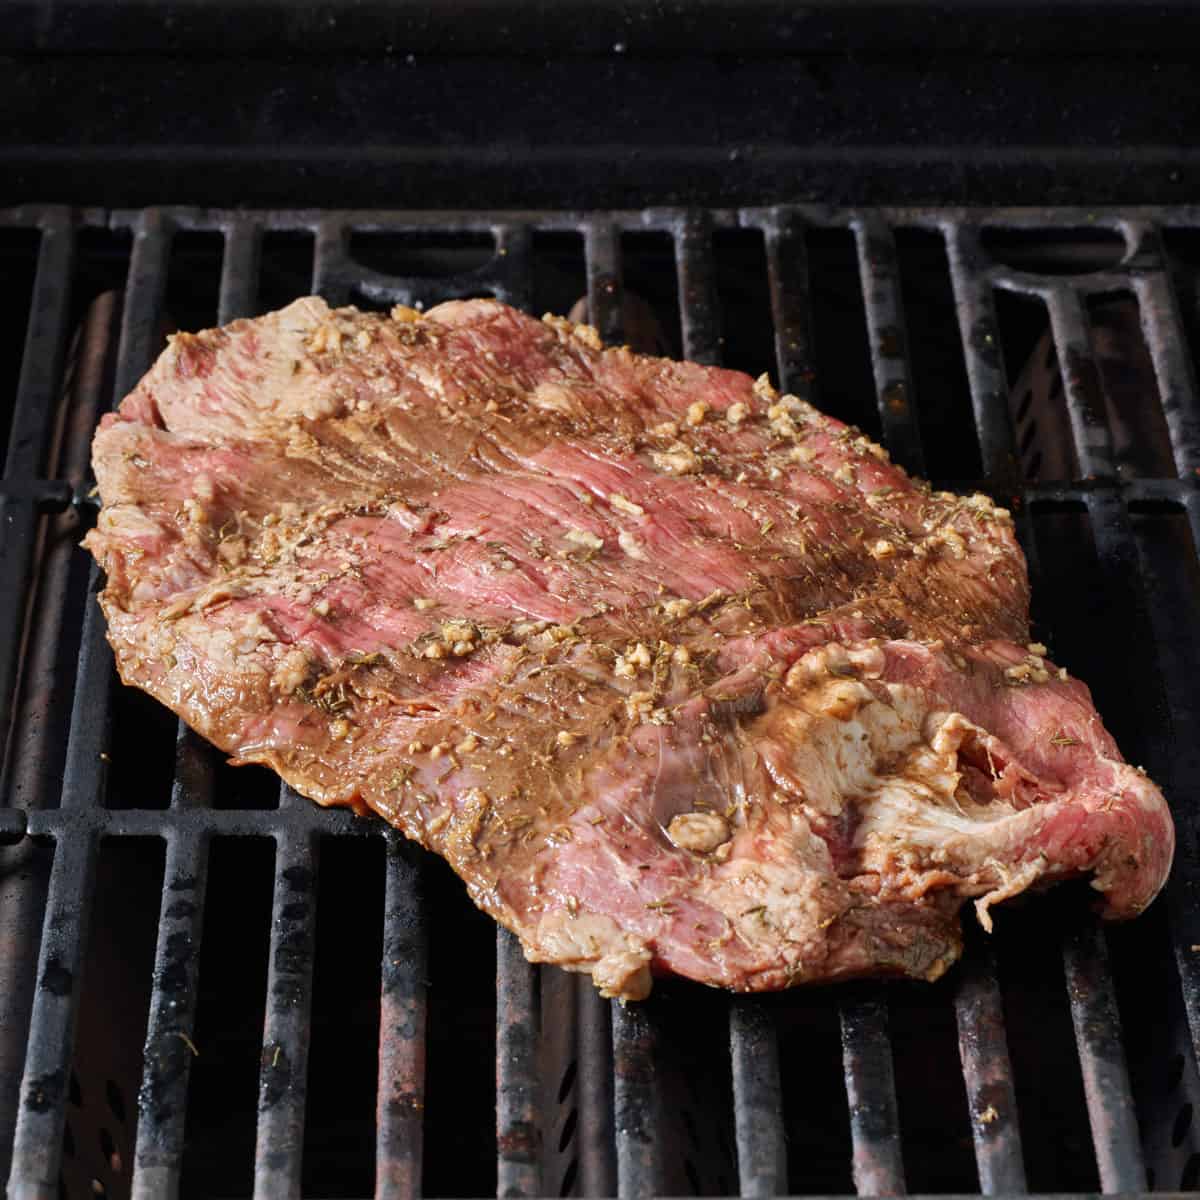 Marinated steak on a grill.